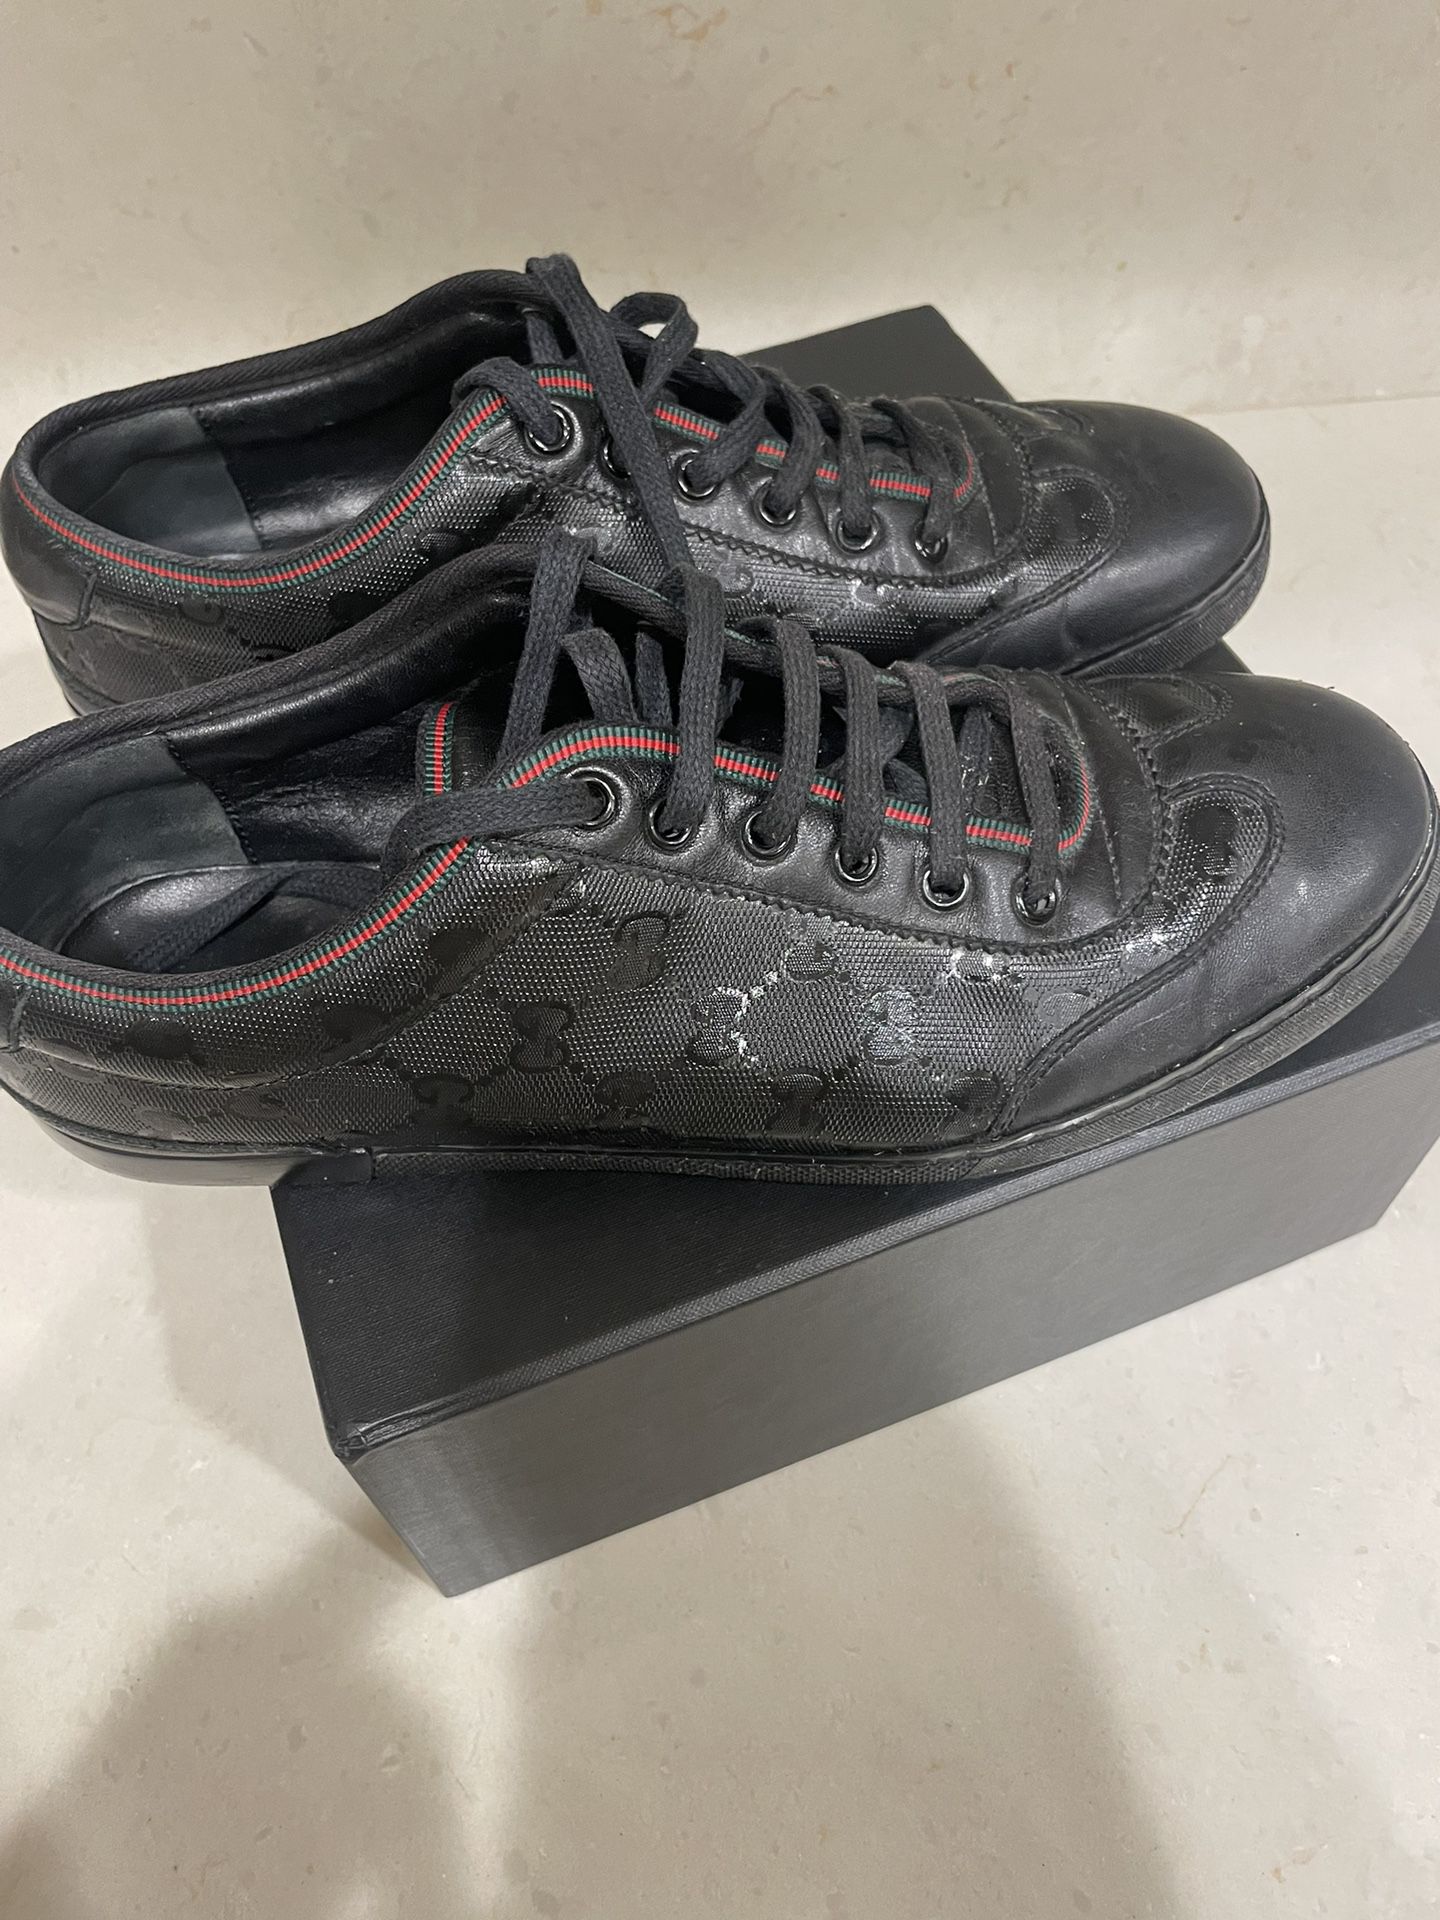 Gucci Shoes Men AUTHENTIC for Sale in Chino, CA - OfferUp